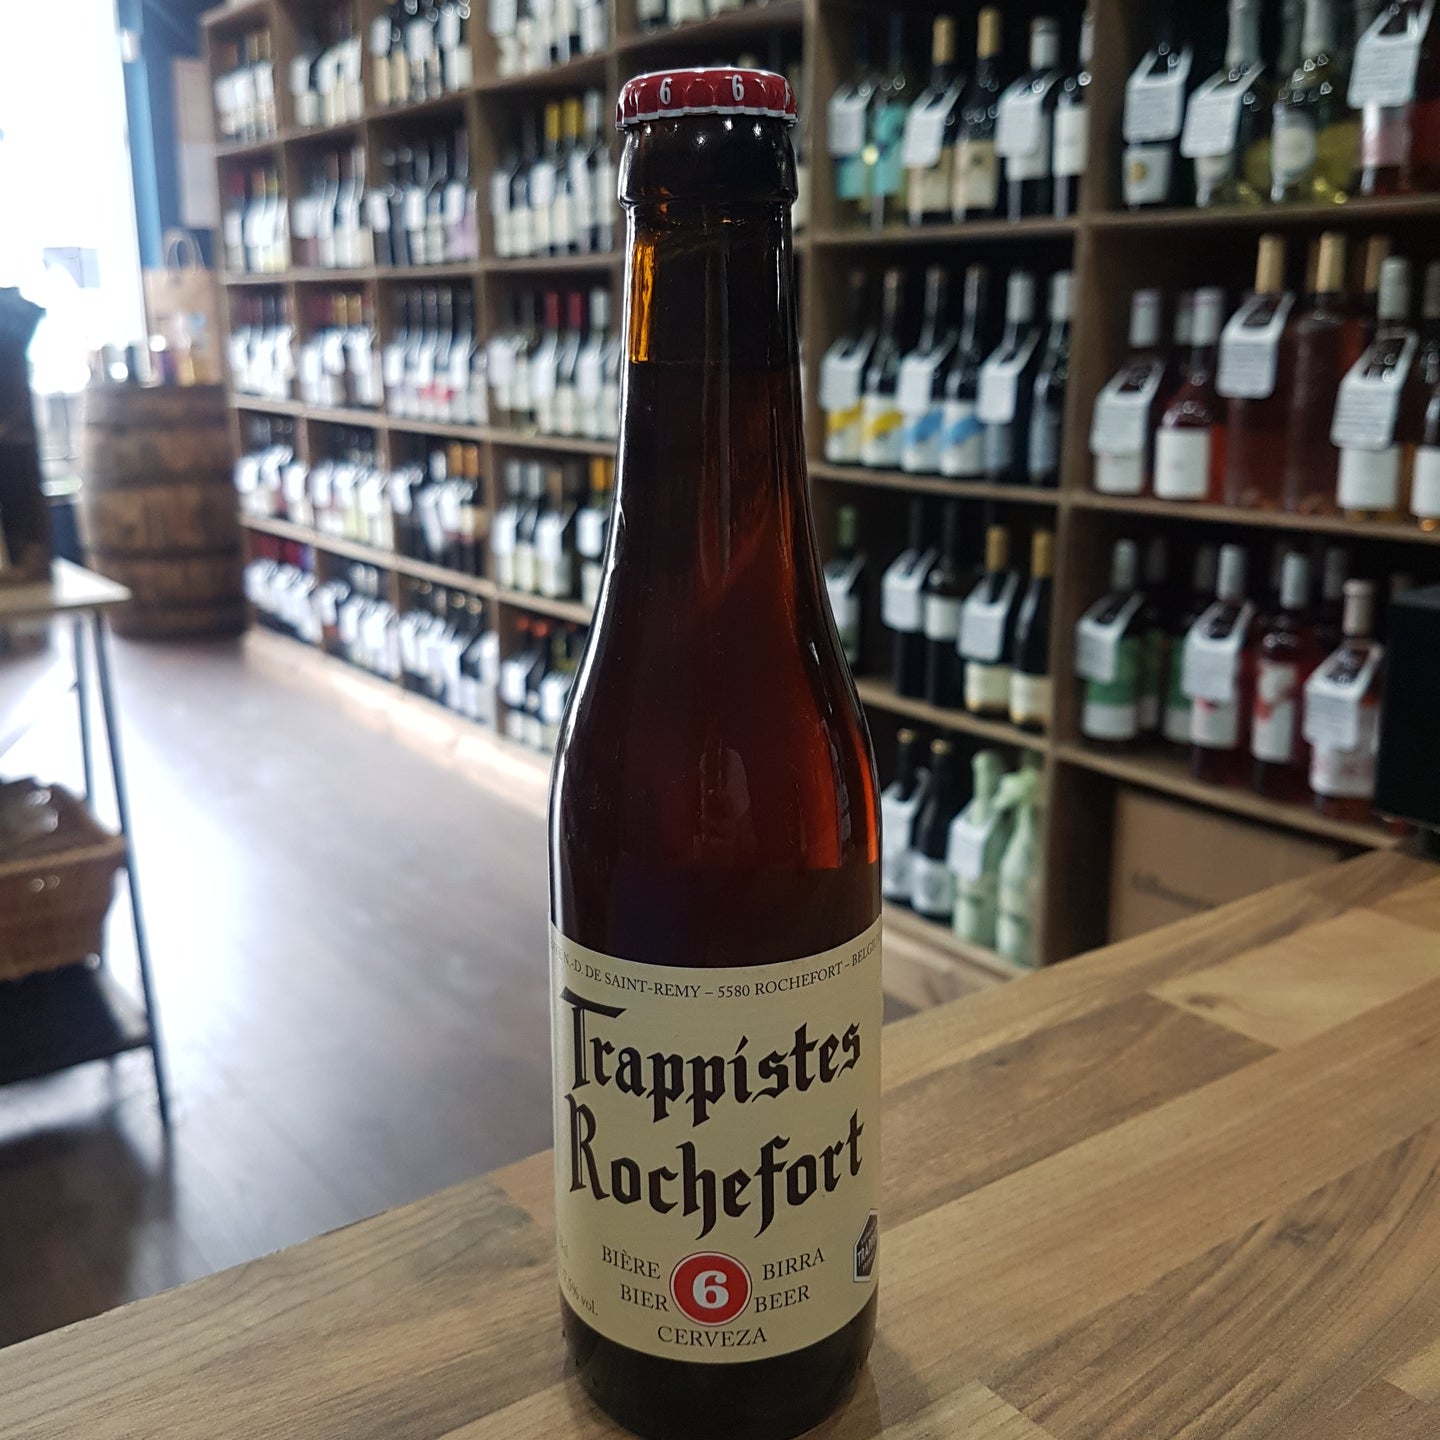 Trappistes Rochefort 6 33cl 7.5%